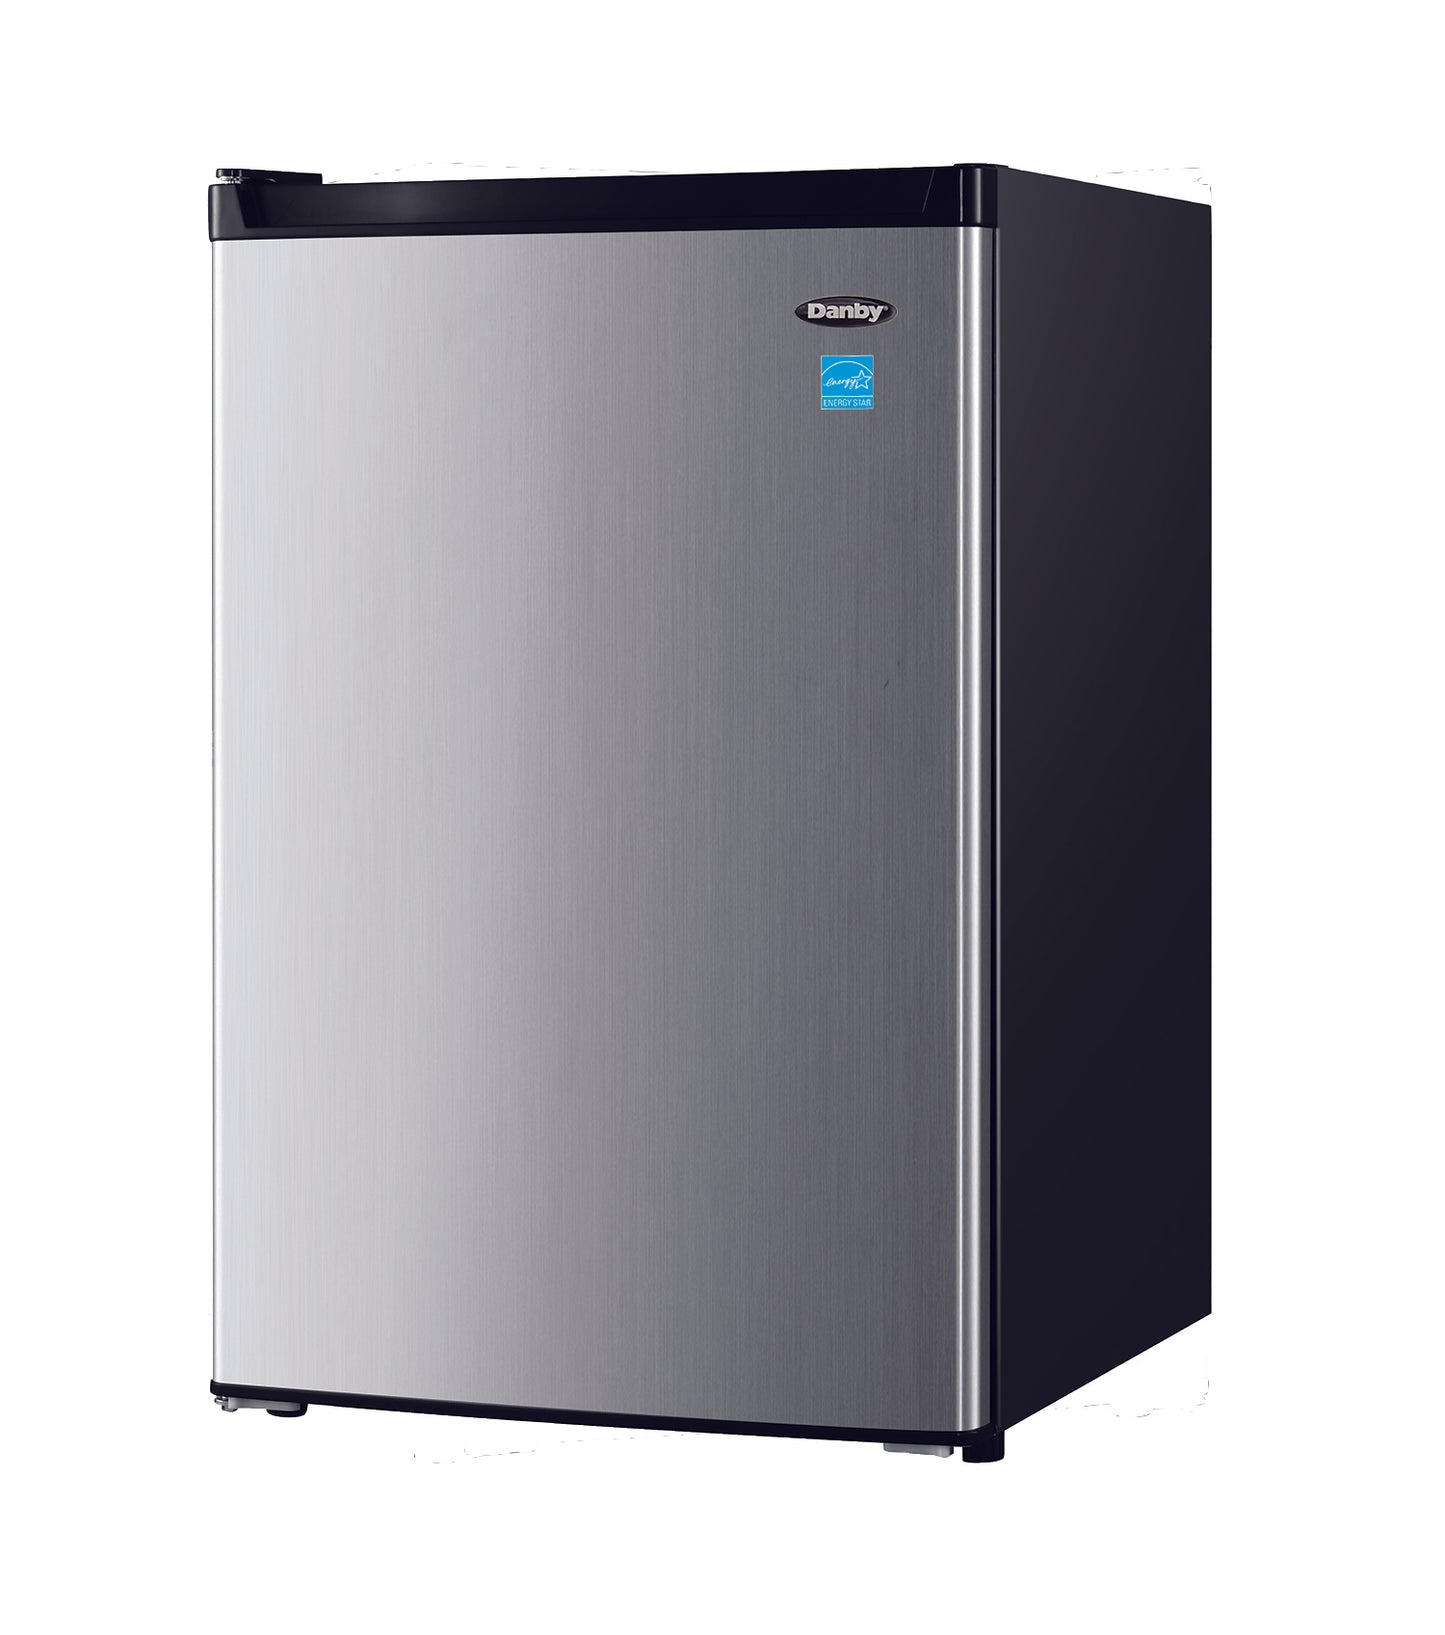 Danby 4.5 cu. ft. Compact Fridge with True Freezer in Stainless Steel - DCR045B1BSLDB-3